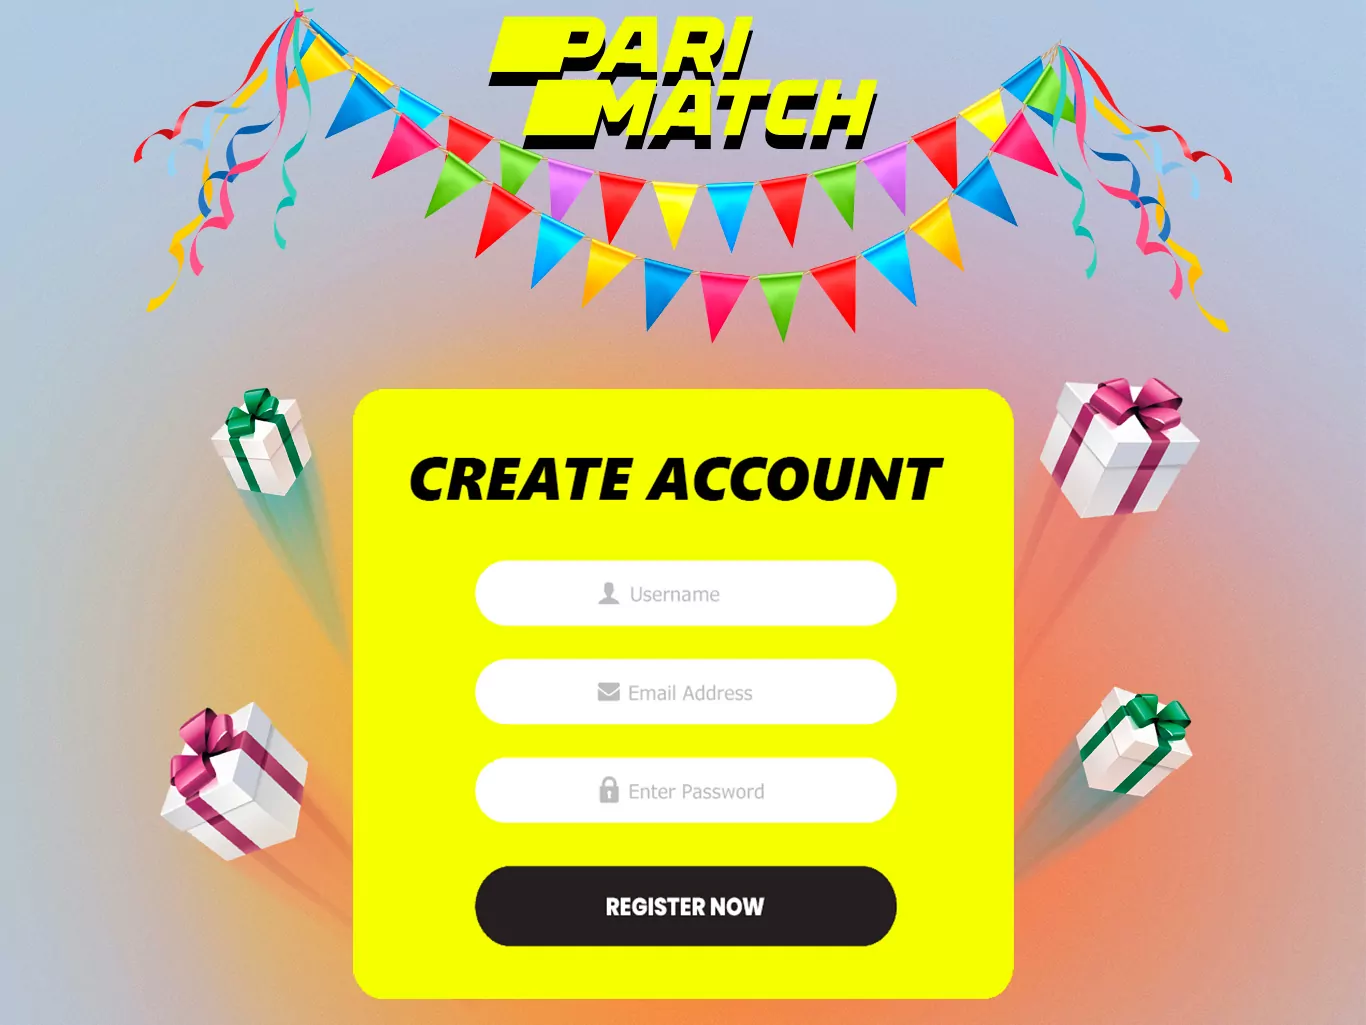 New users receive 12,000 BDT to their account, when registering with Parimatch.